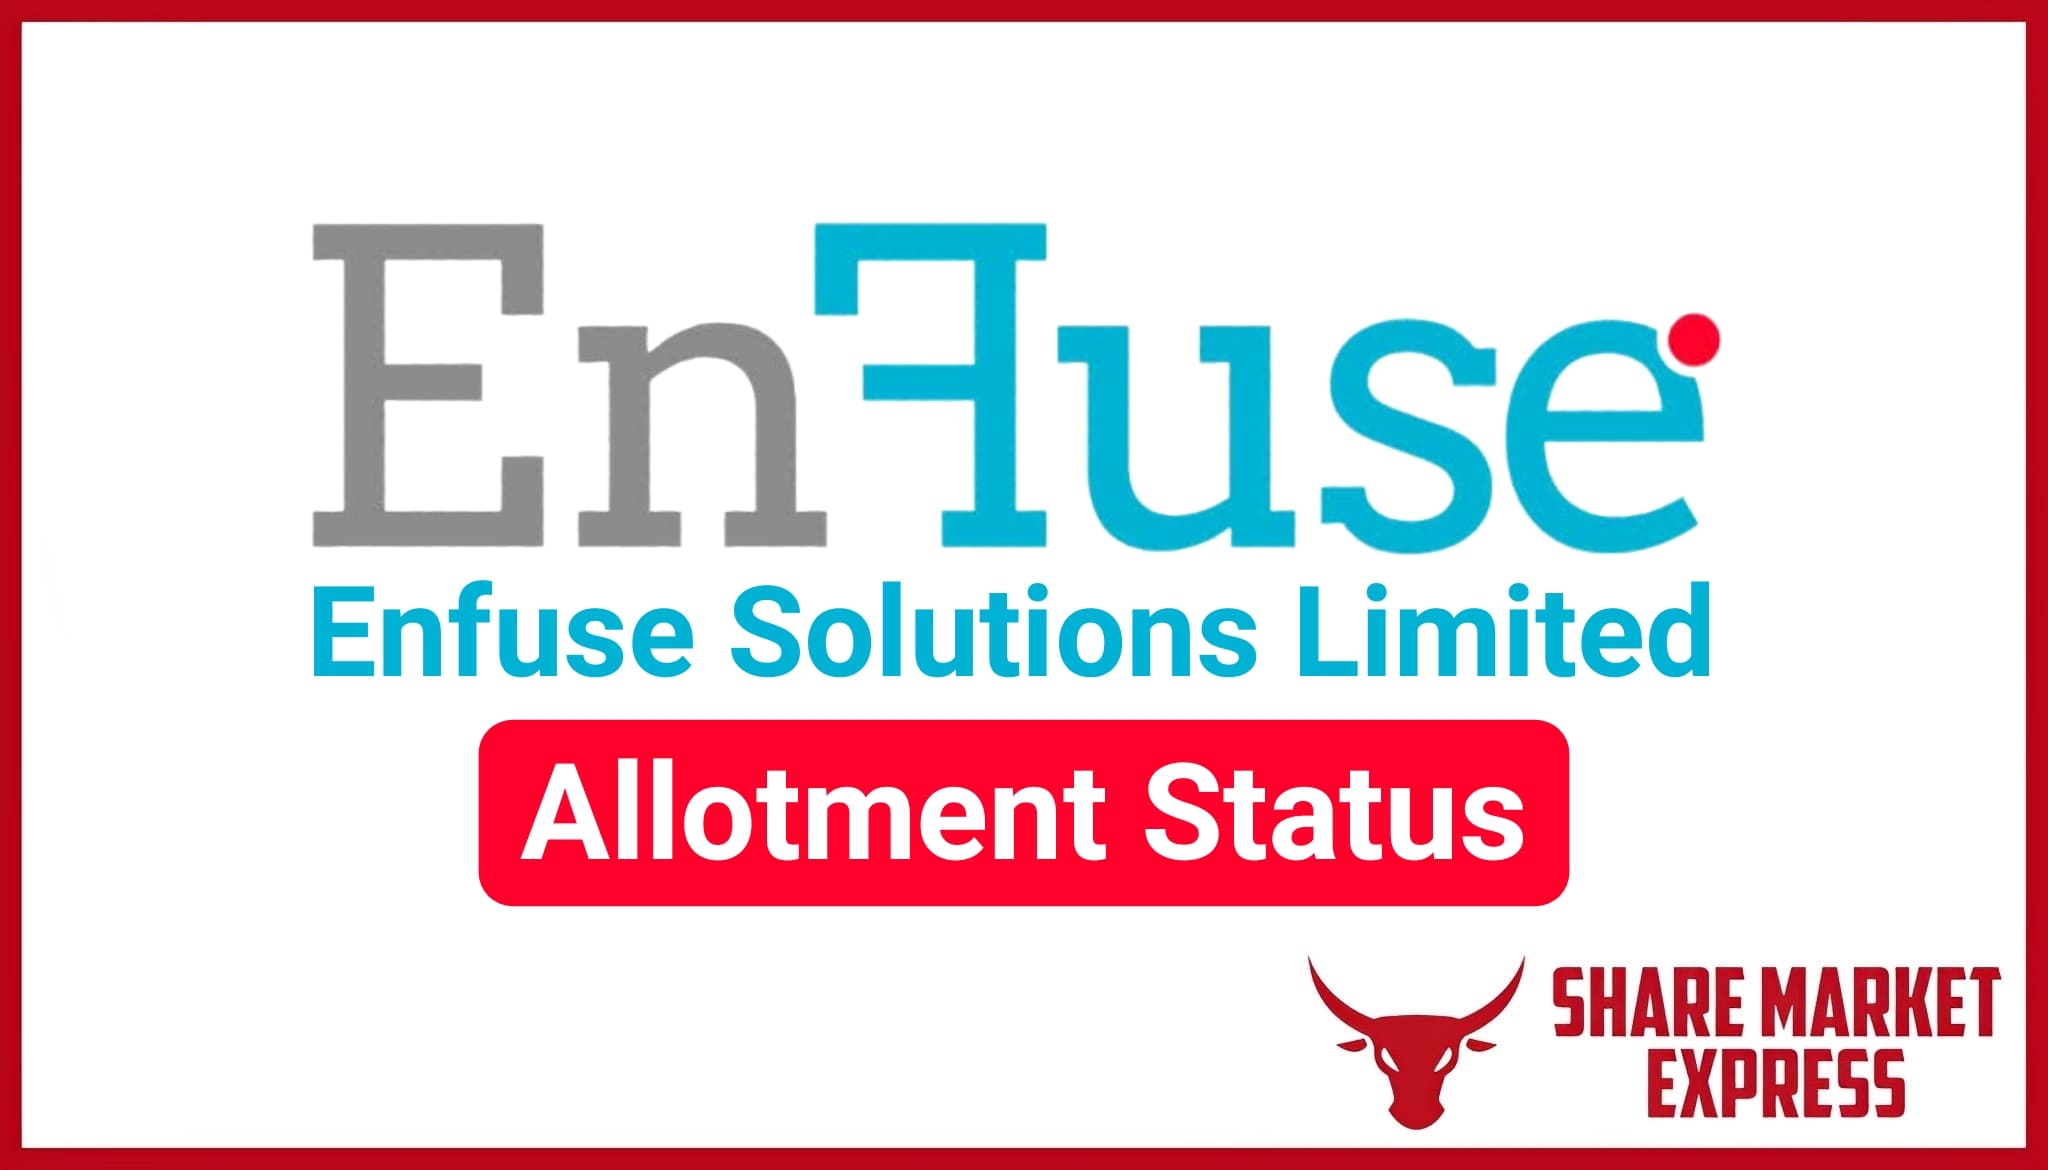 Enfuse Solutions IPO Allotment Status